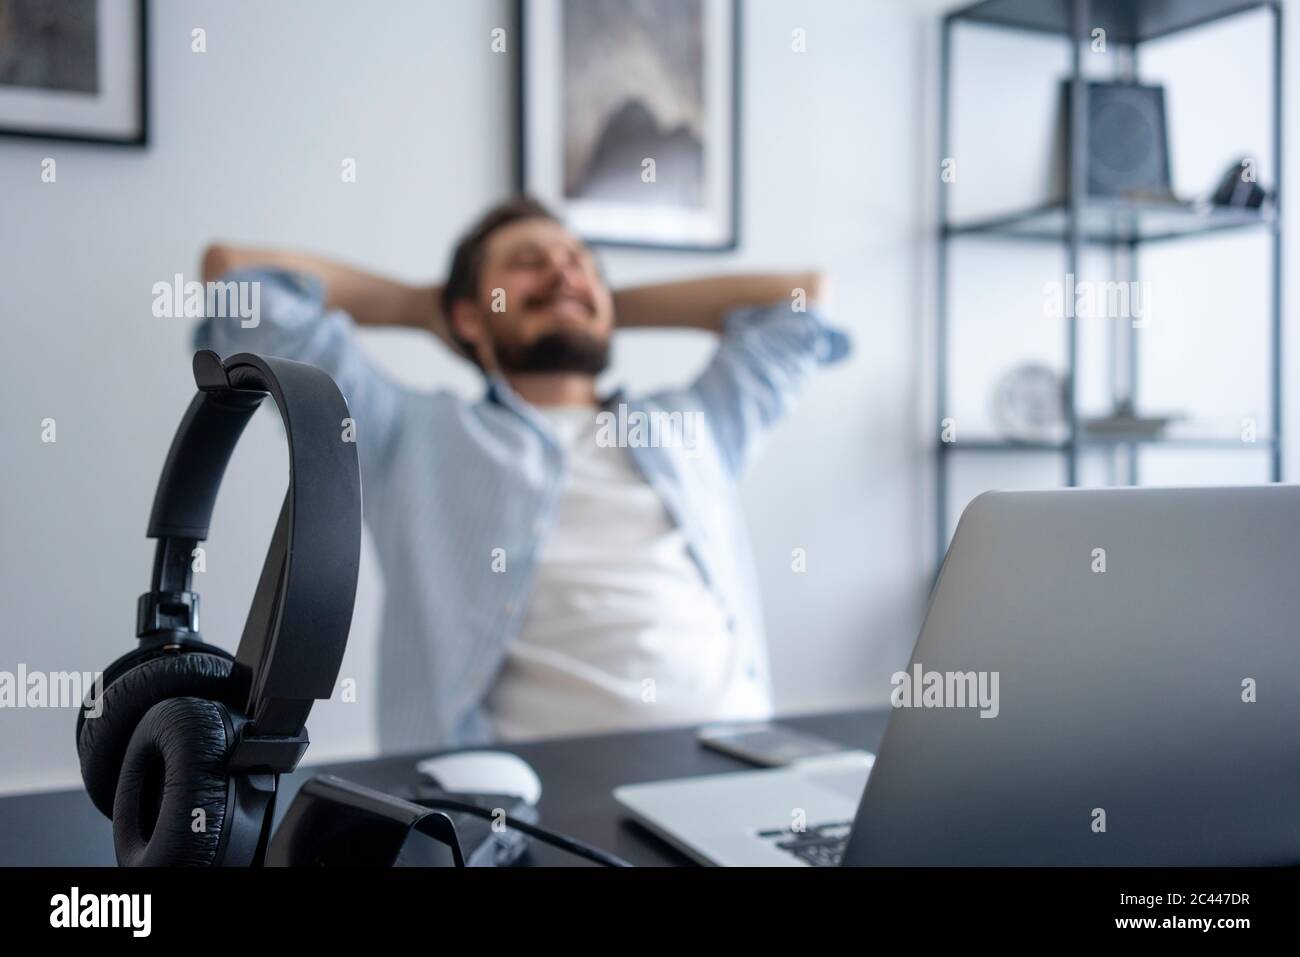 Man leaning back at desk, focus on headphone Stock Photo